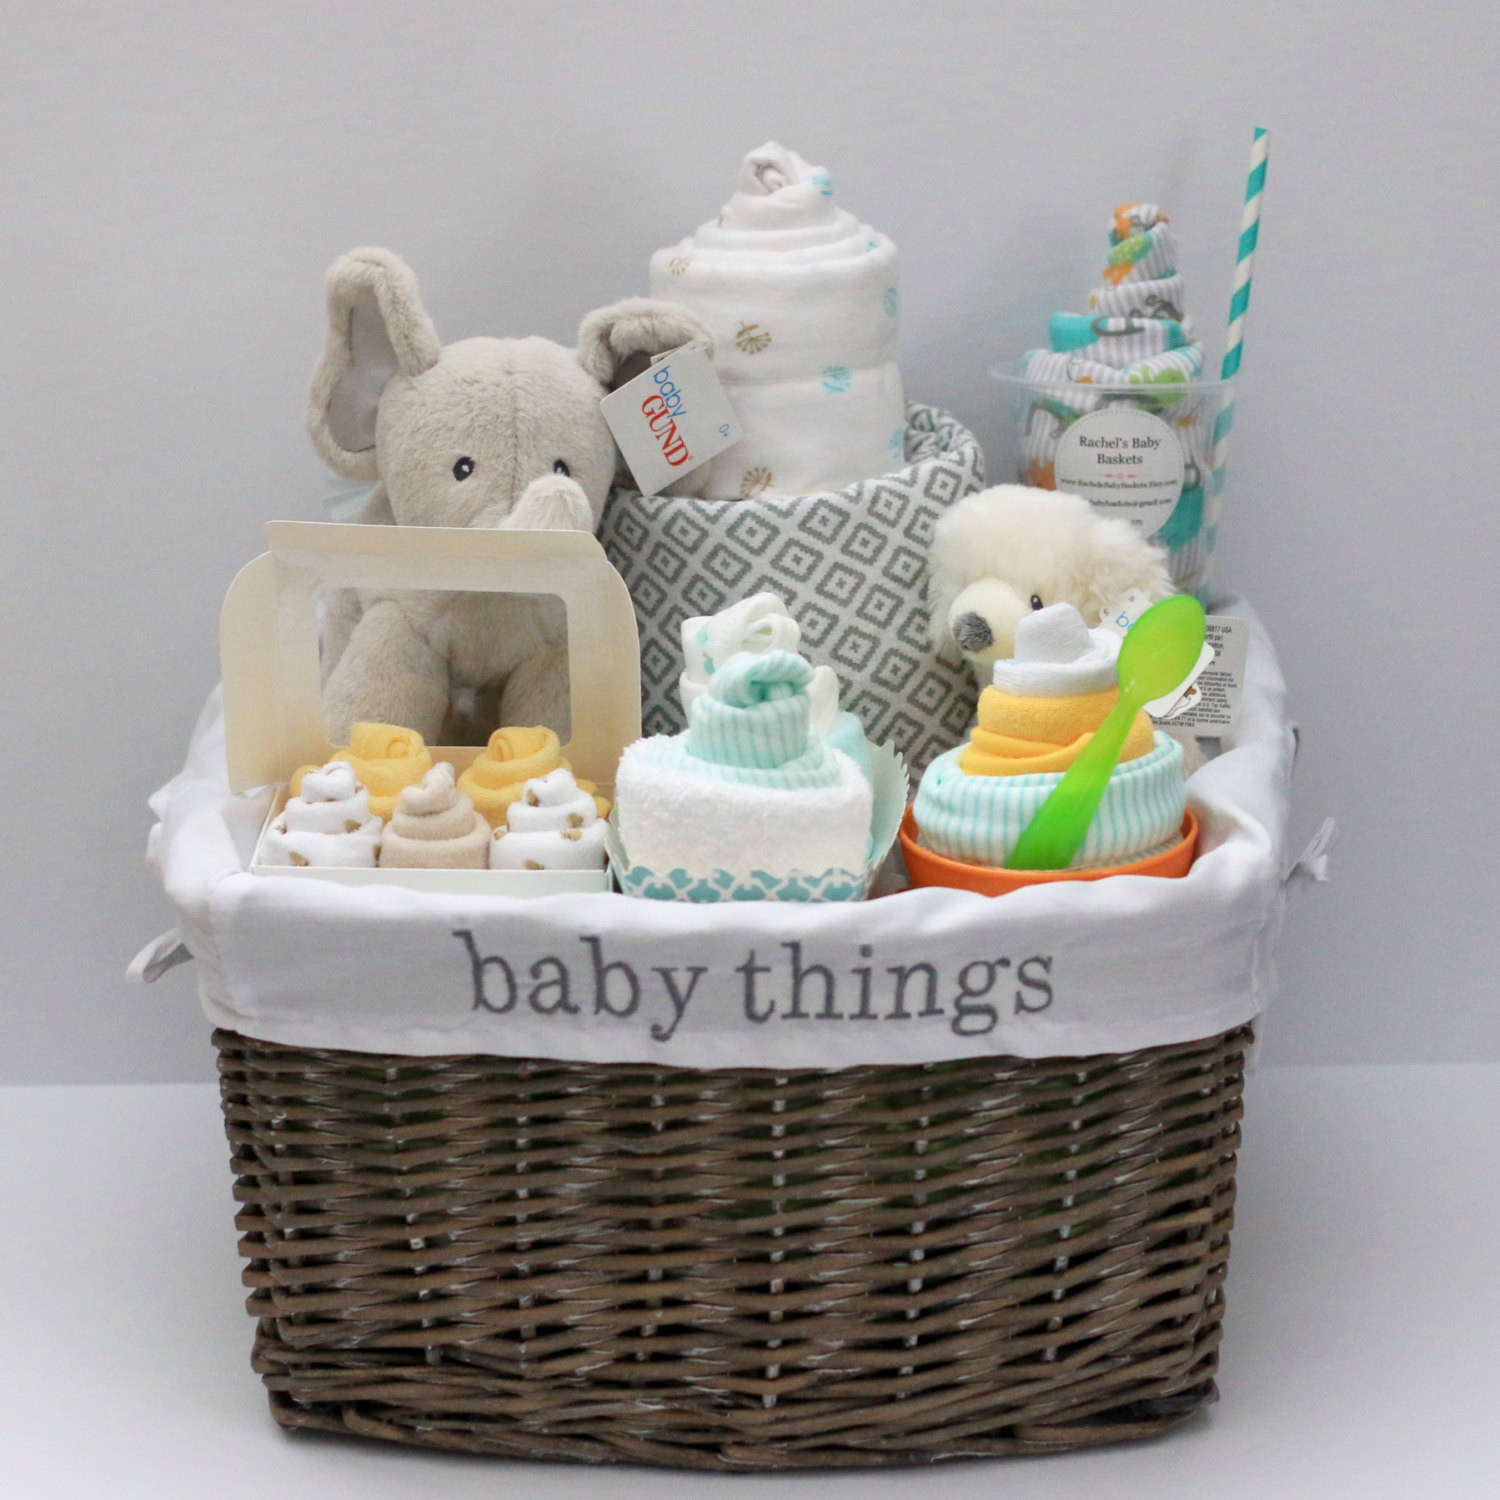 Personalized Baby Shower Gift Ideas
 Gender Neutral Baby Gift Basket Baby Shower Gift Unique Baby